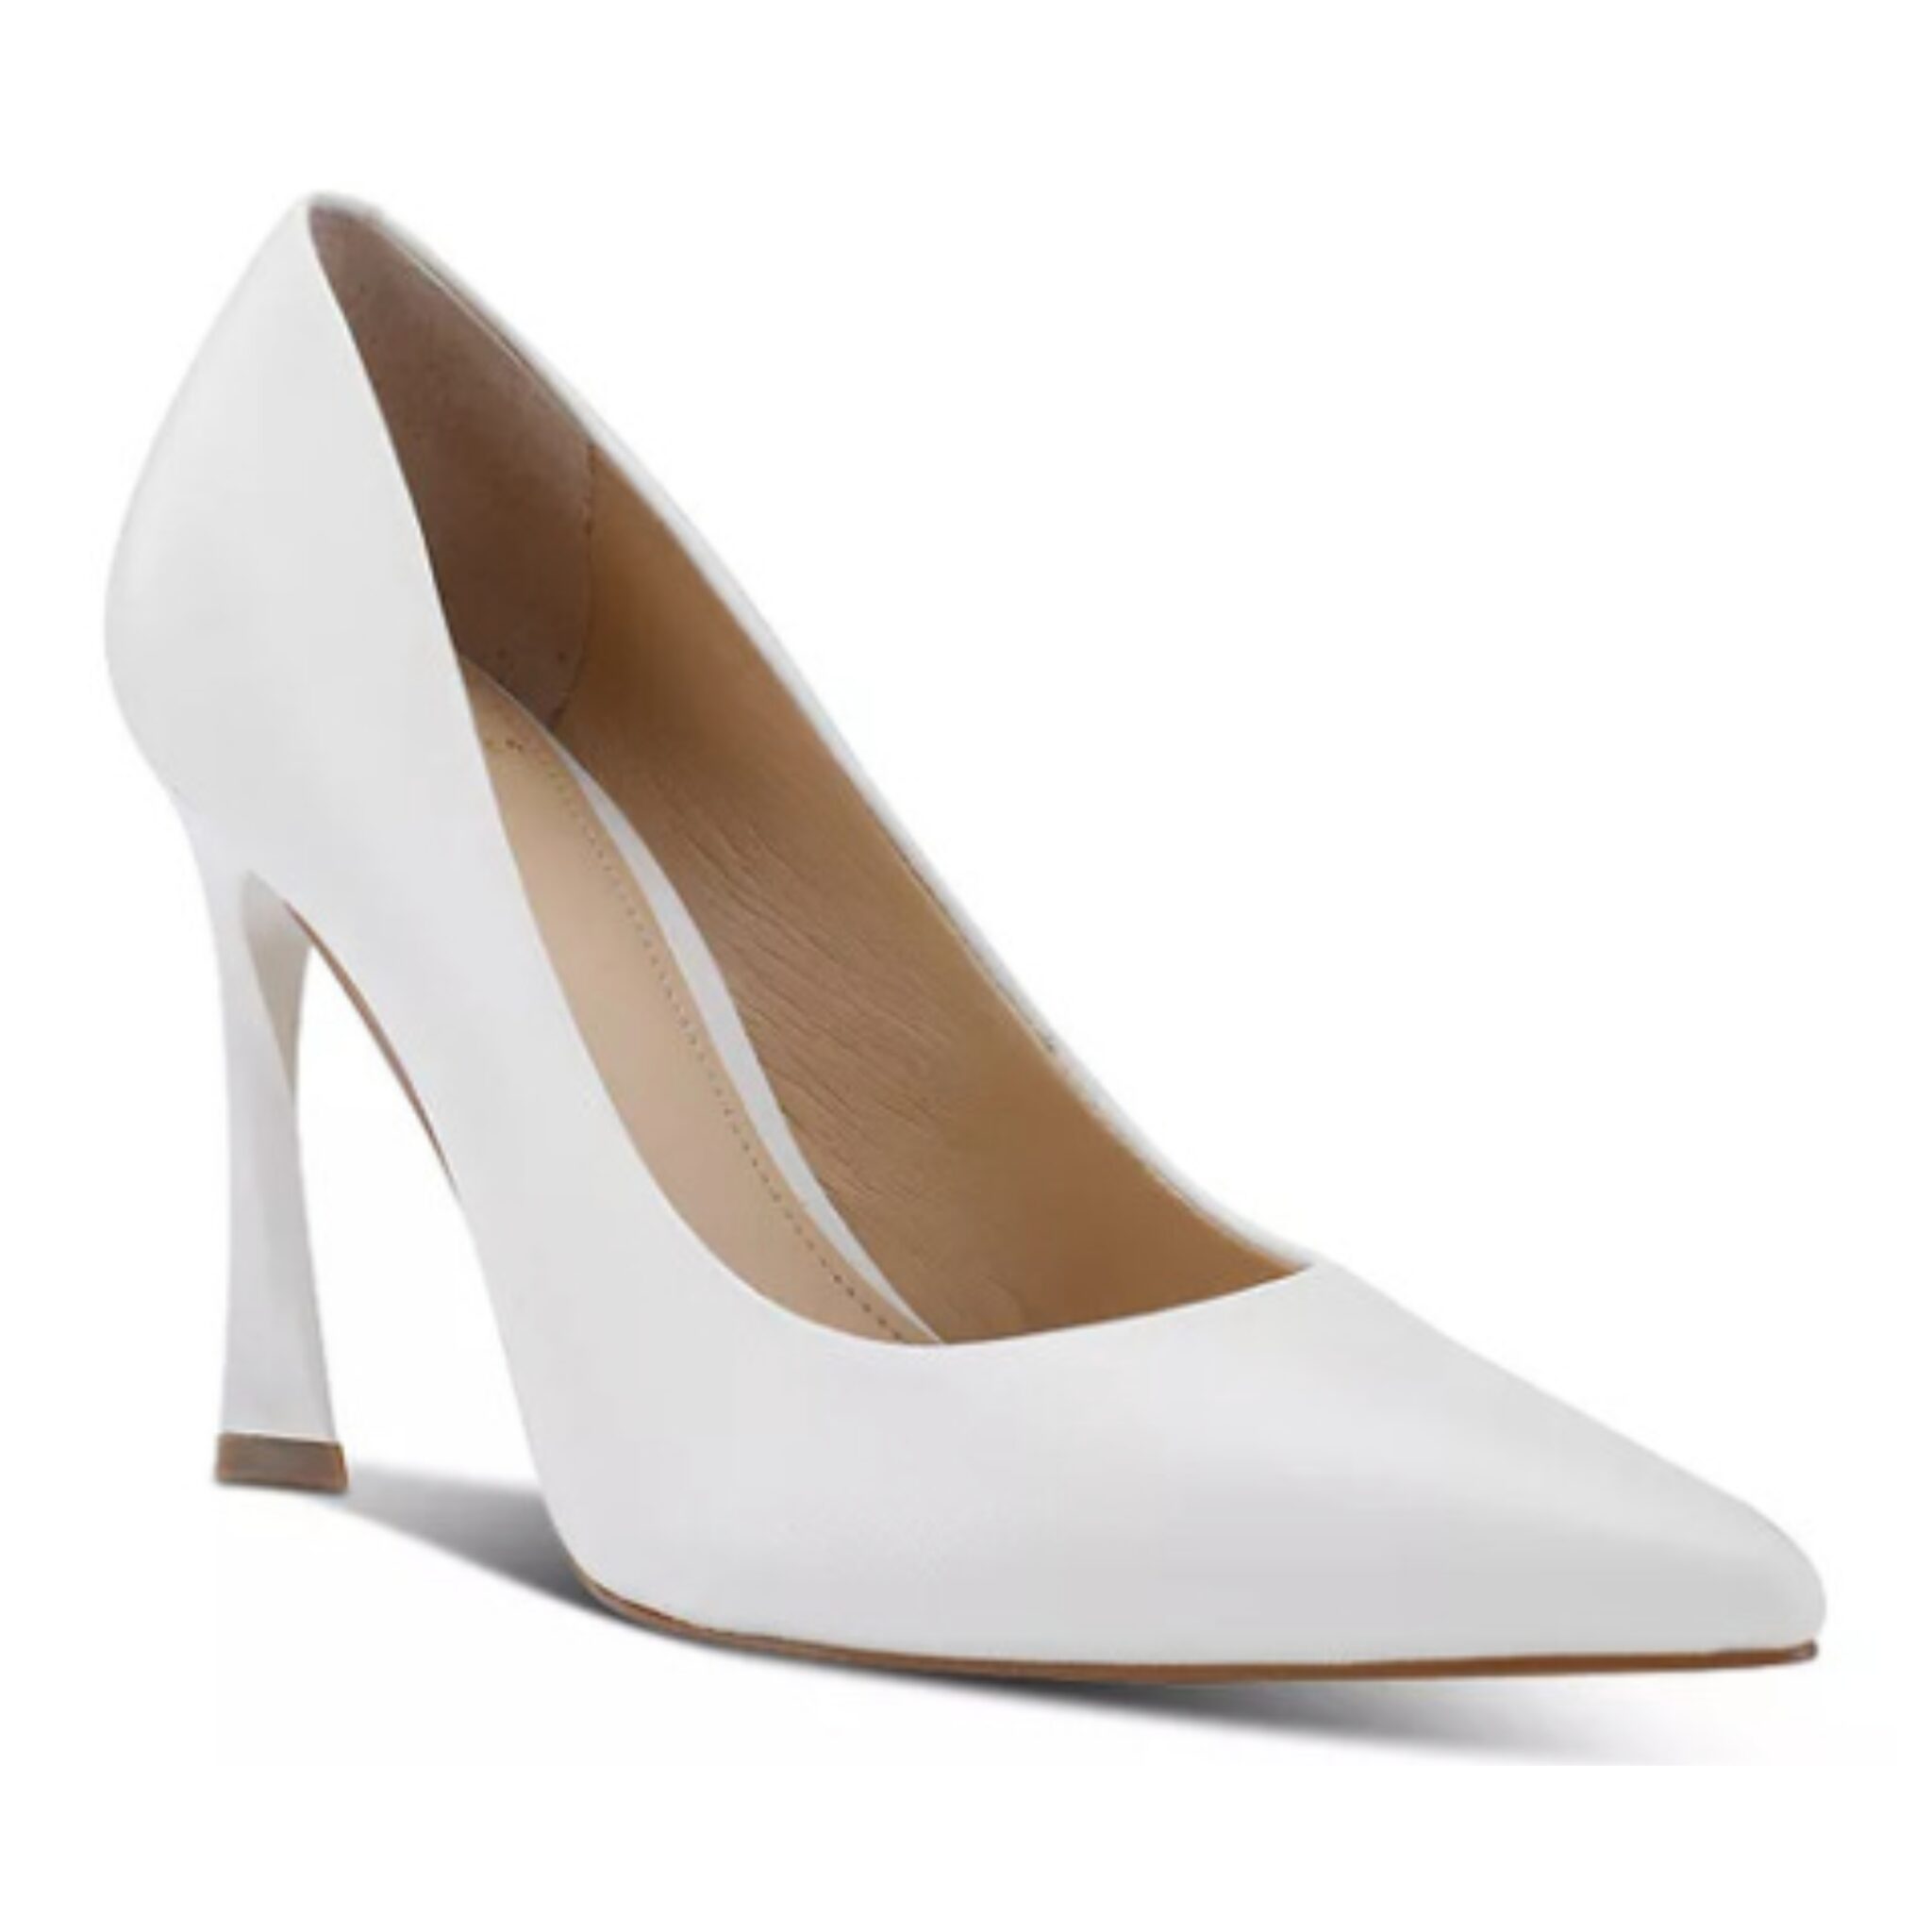 White pumps to wear with leather leggings.